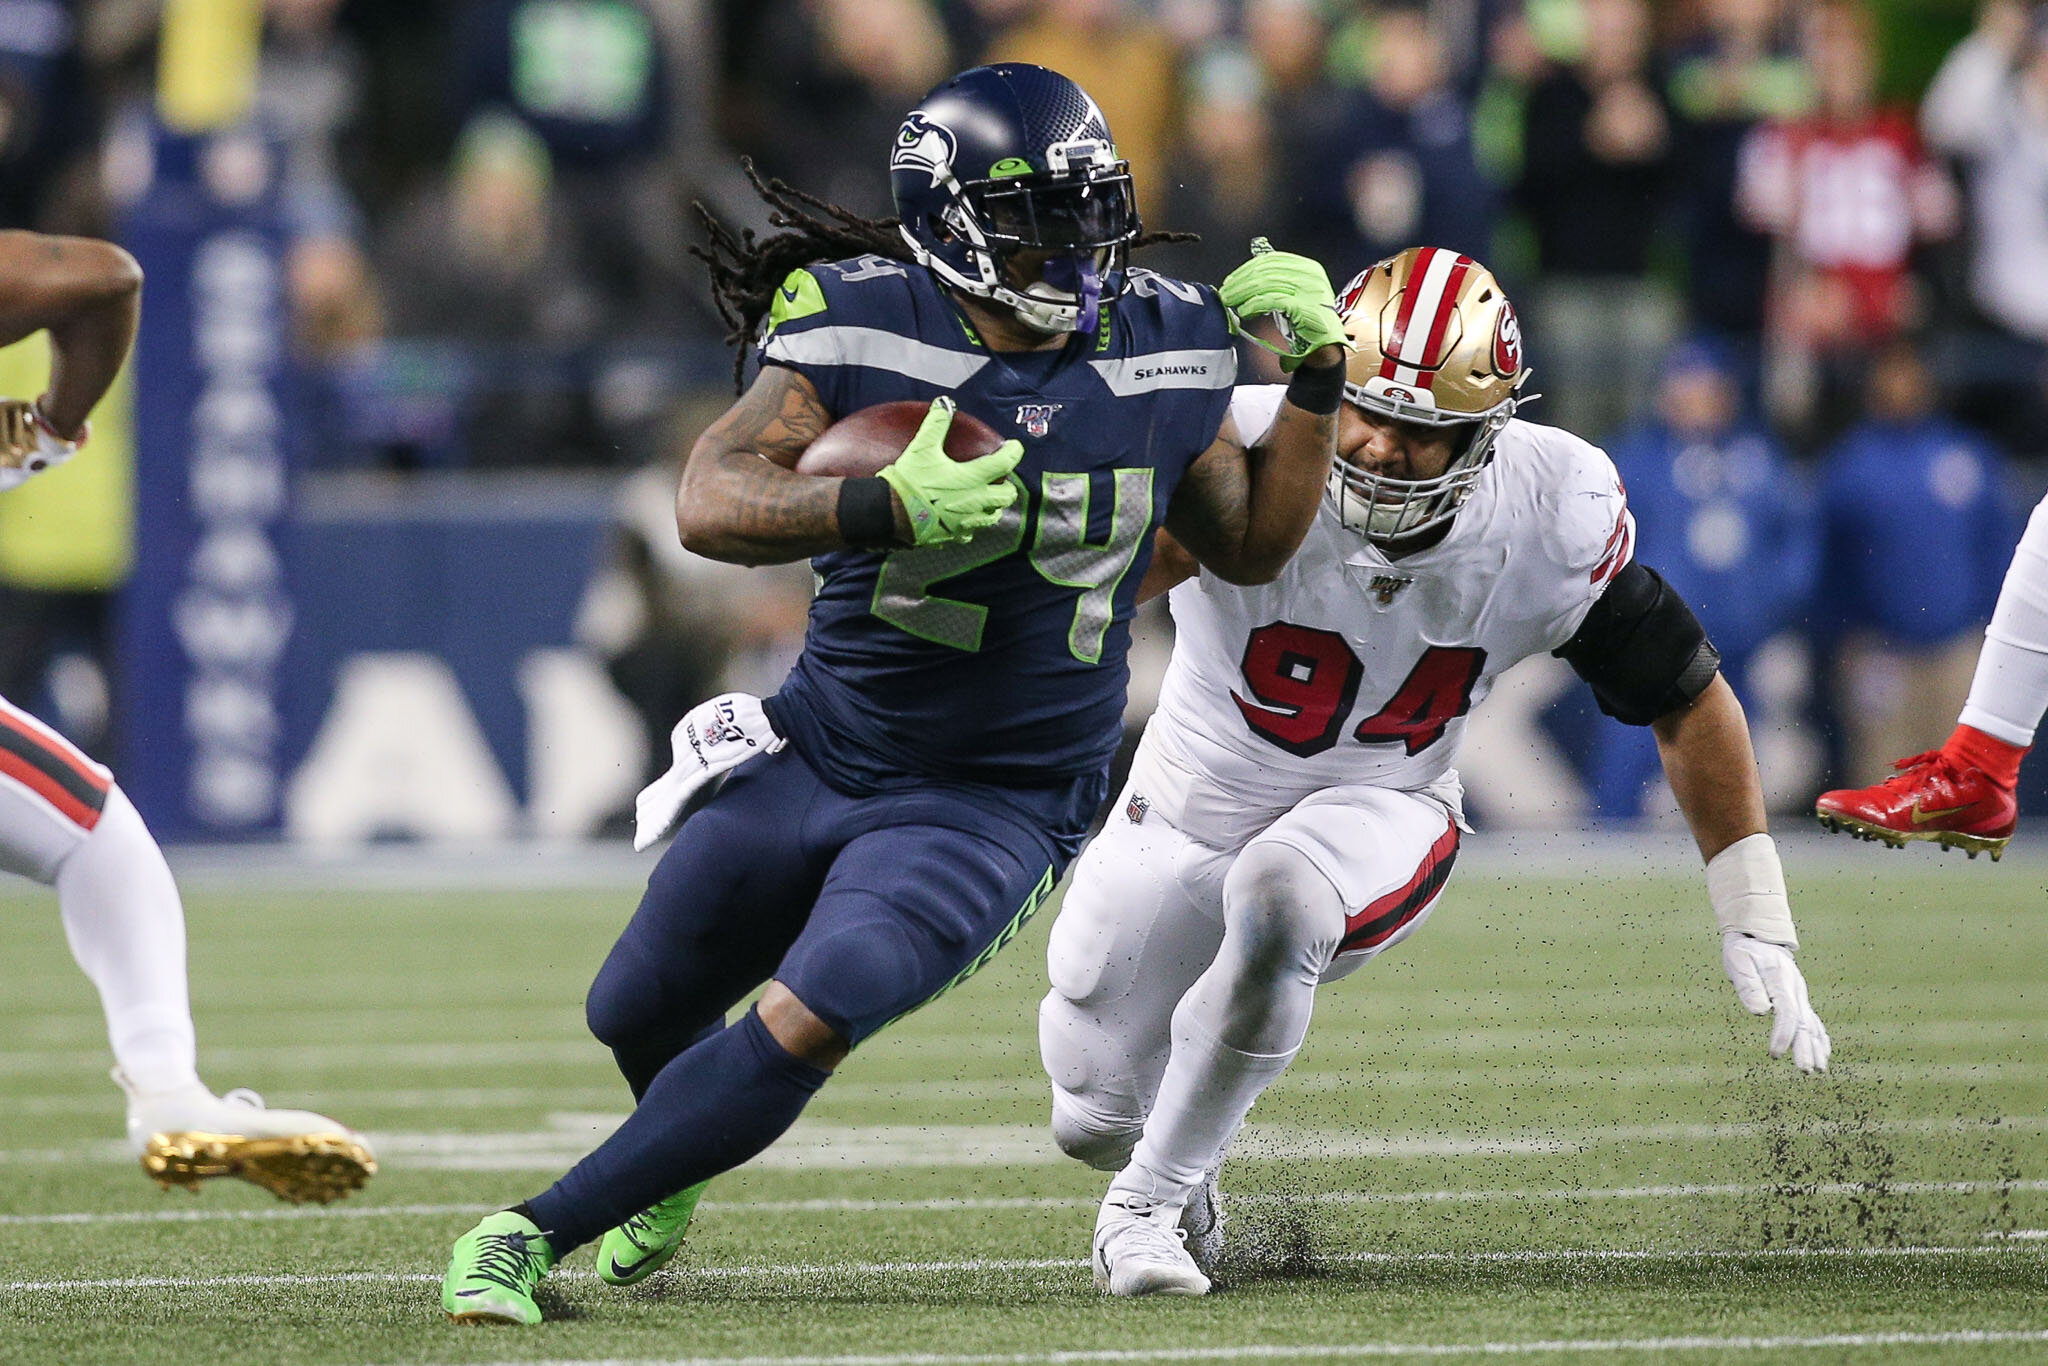  Seattle Seahawks running back Marshawn Lynch (24) runs past San Francisco 49ers defensive end Solomon Thomas (94) during the third quarter of an NFL football game, Sunday, December 29, 2019, in Seattle. The 49ers defeat the Seahawks 26-21. (Matt Fer